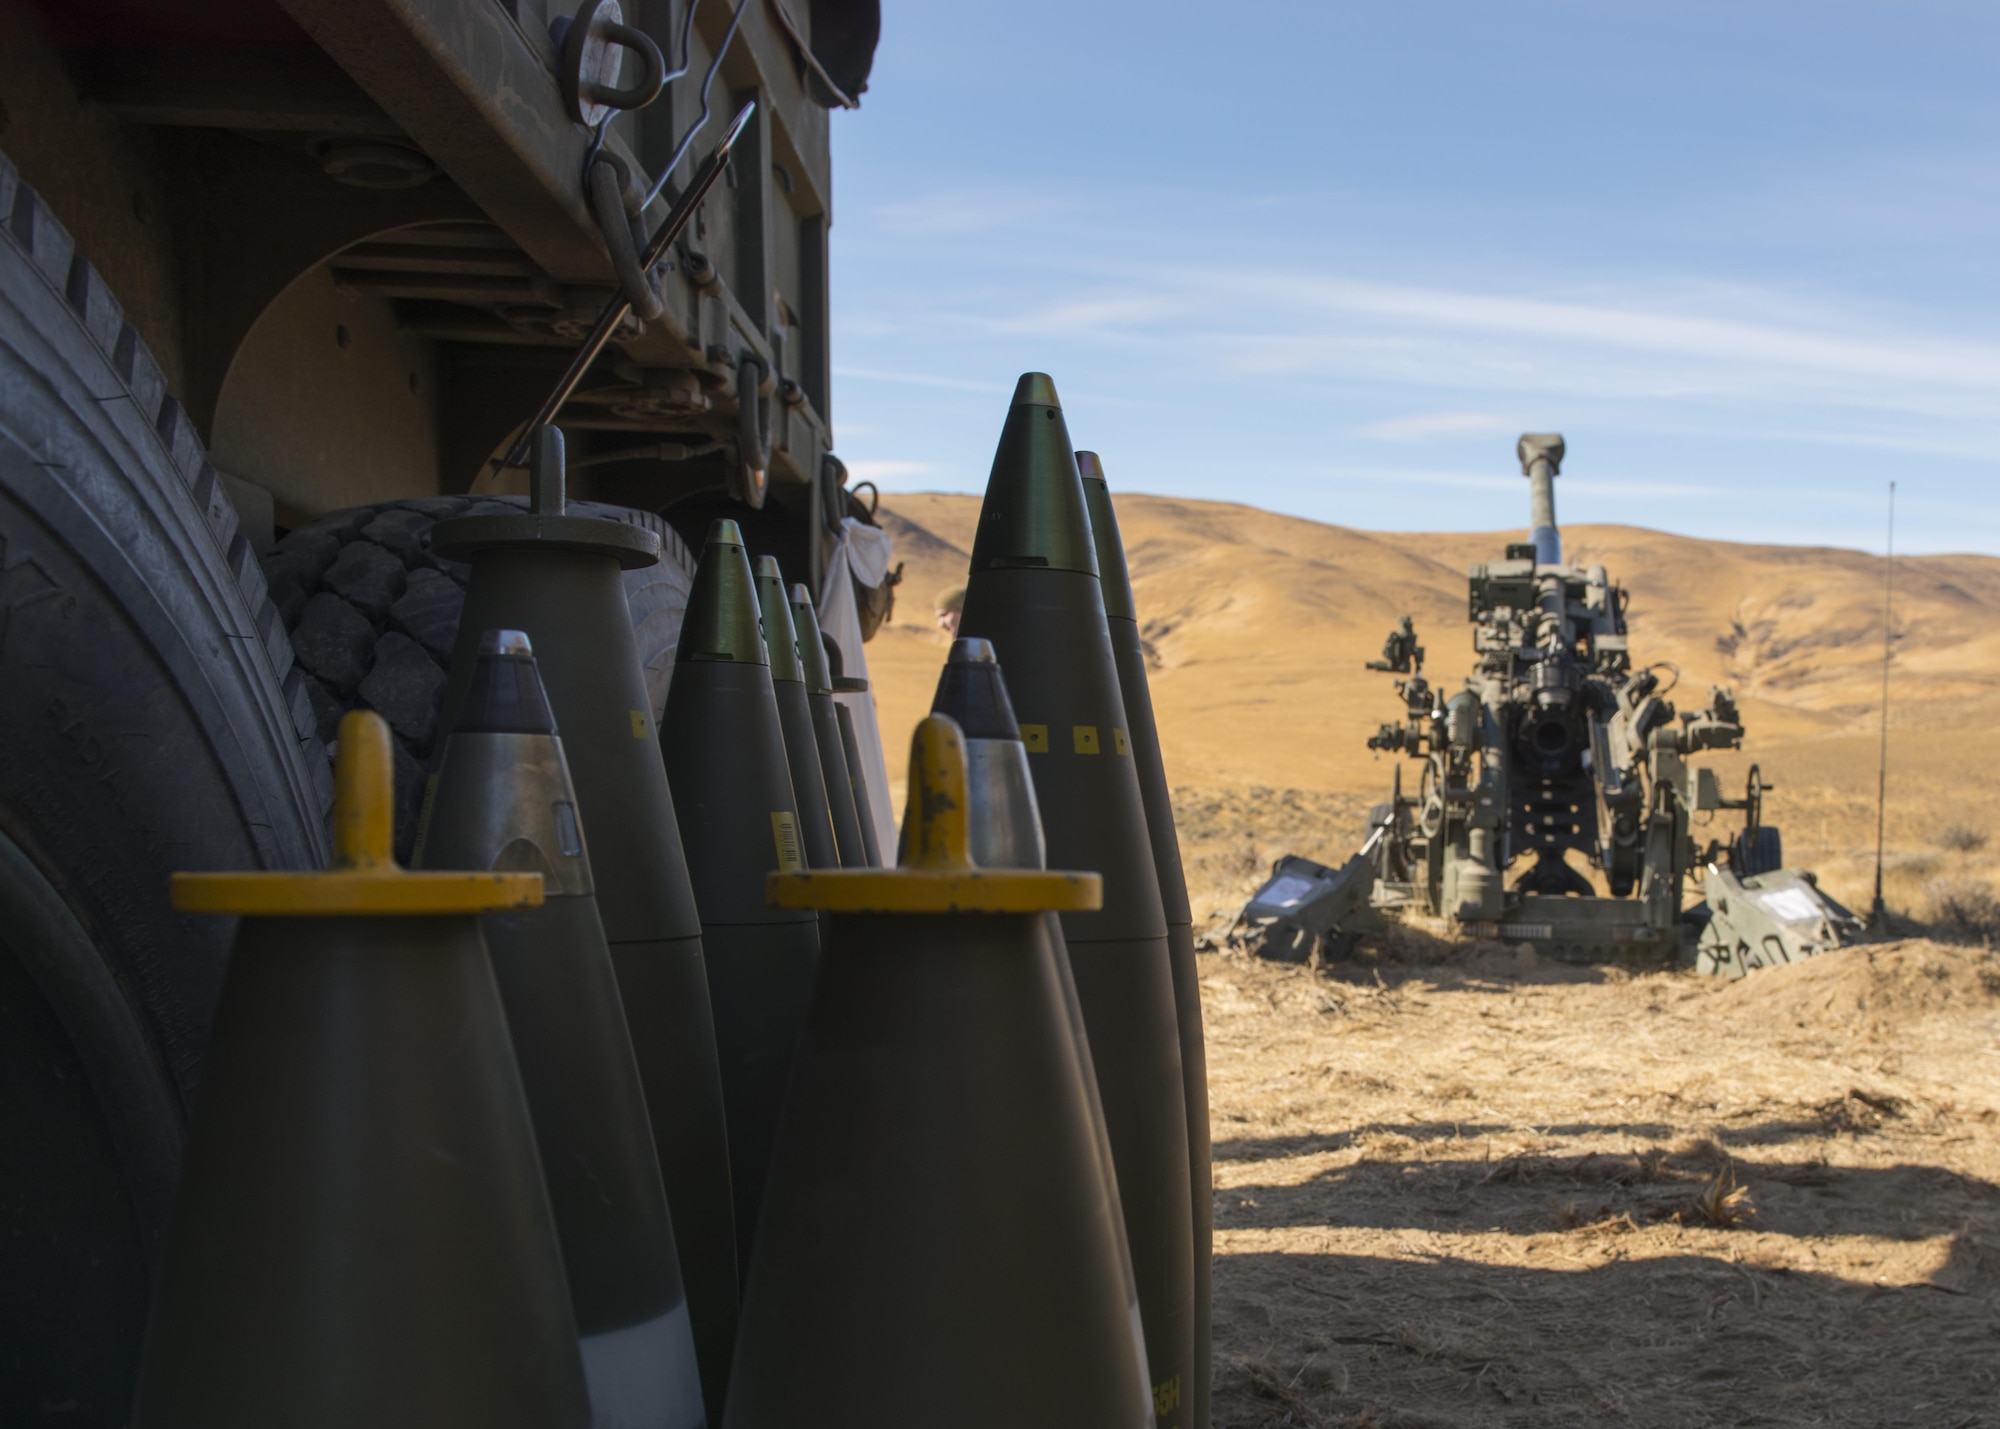 155 mm projectiles for a M777A2 howitzer sit beside their ammo truck during a live-fire U.S. Marine Corps training exercise at the Yakima Training Center, Washington, Oct 14, 2017. The M777 howitzer is a towed, lightweight artillery piece that succeeded the M198 howitzer in the USMC and U.S. Army in 2005. (U.S. Air Force photo/Senior Airman Ryan Lackey)